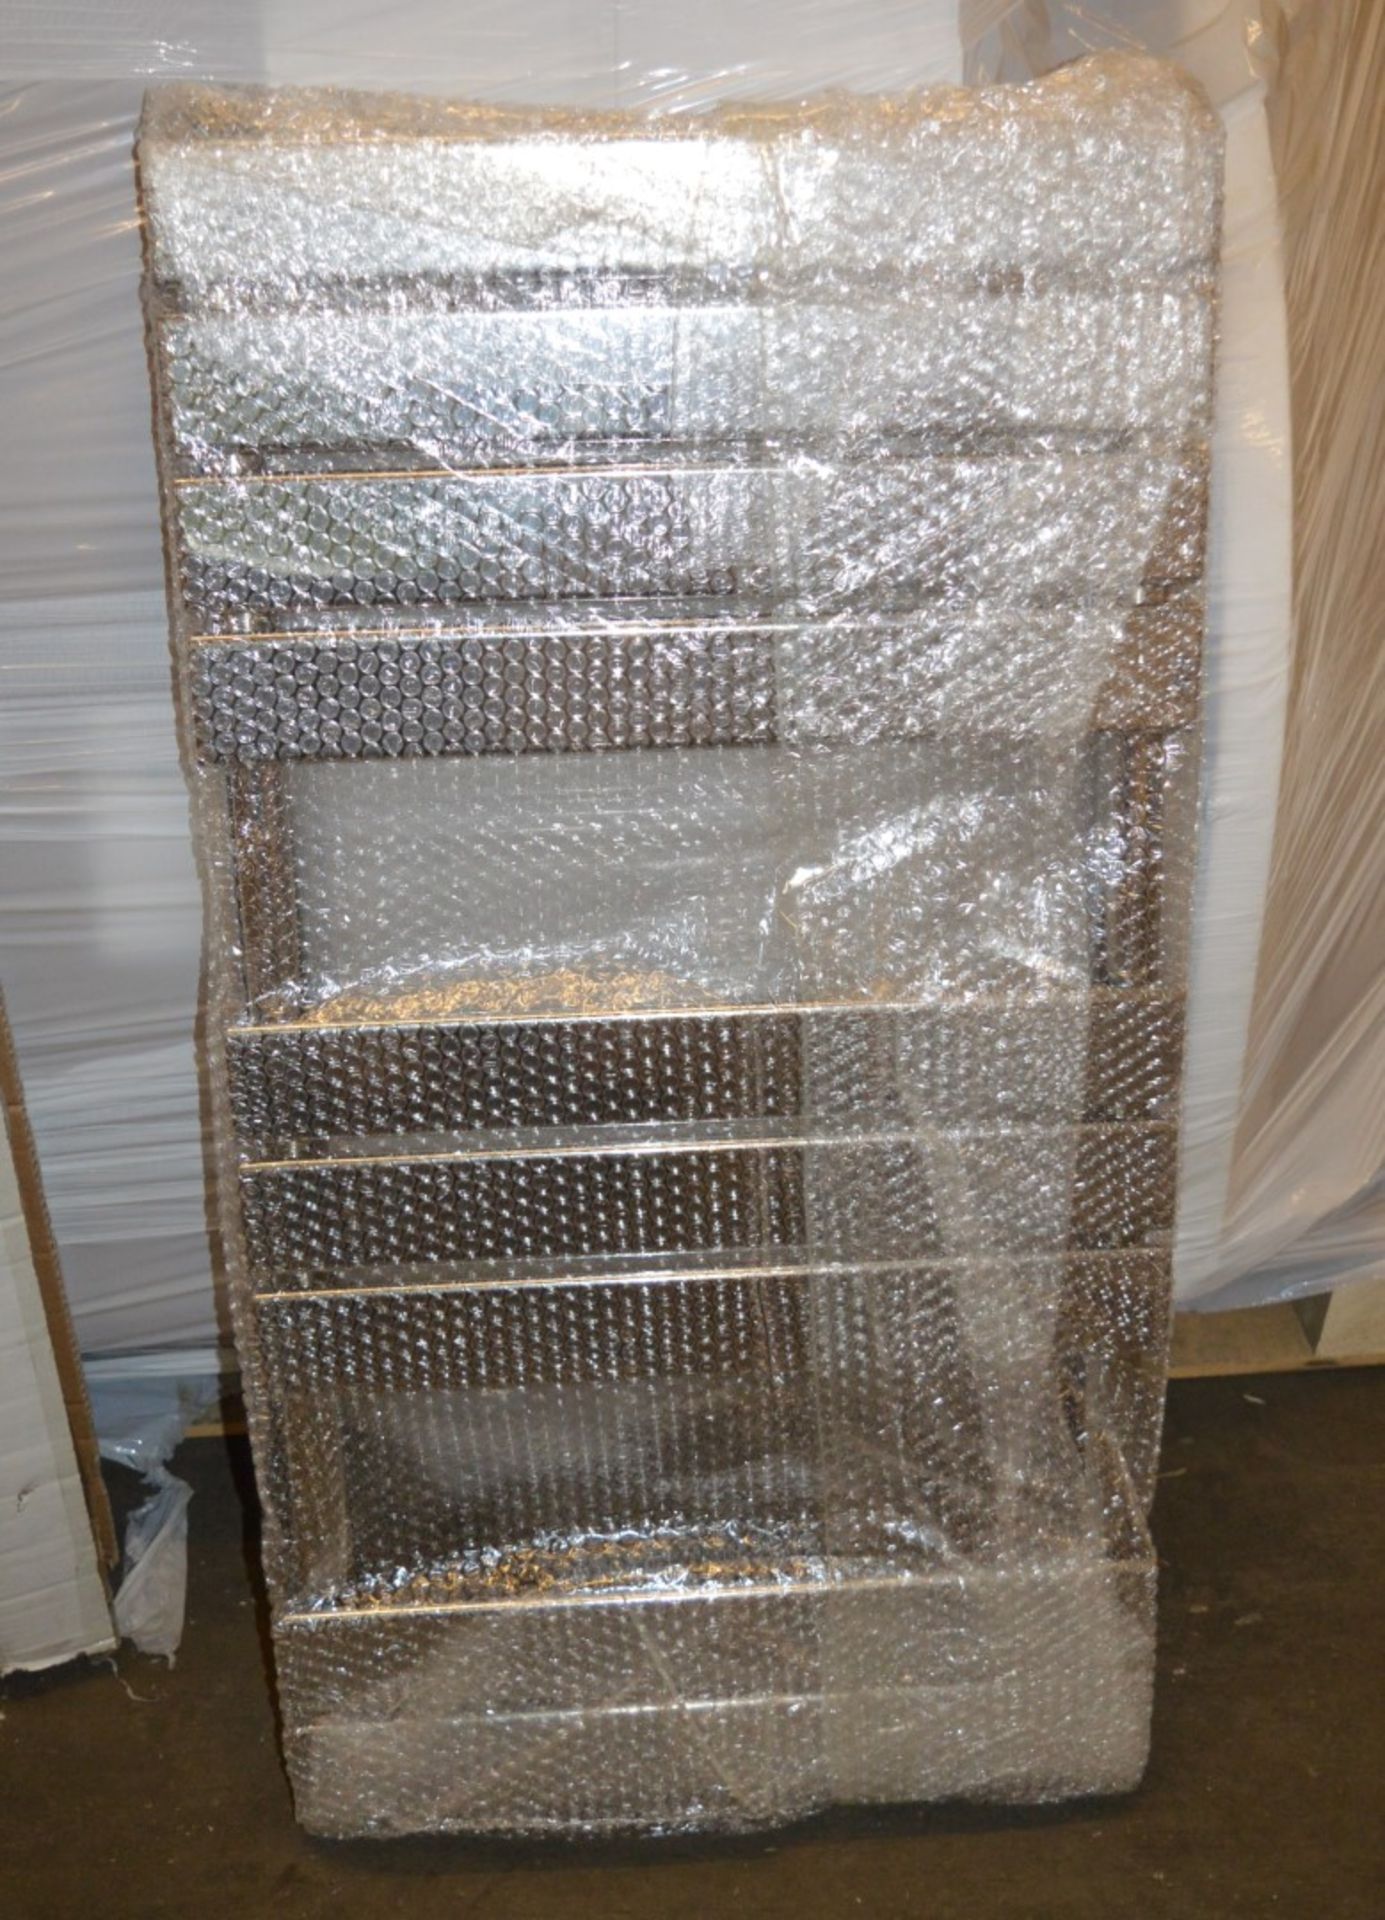 1 x Signelle Heated Towel Radiator - Unused Sealed Stock - 950x500mm - CL190 - Ref BR129 - Location: - Image 3 of 3